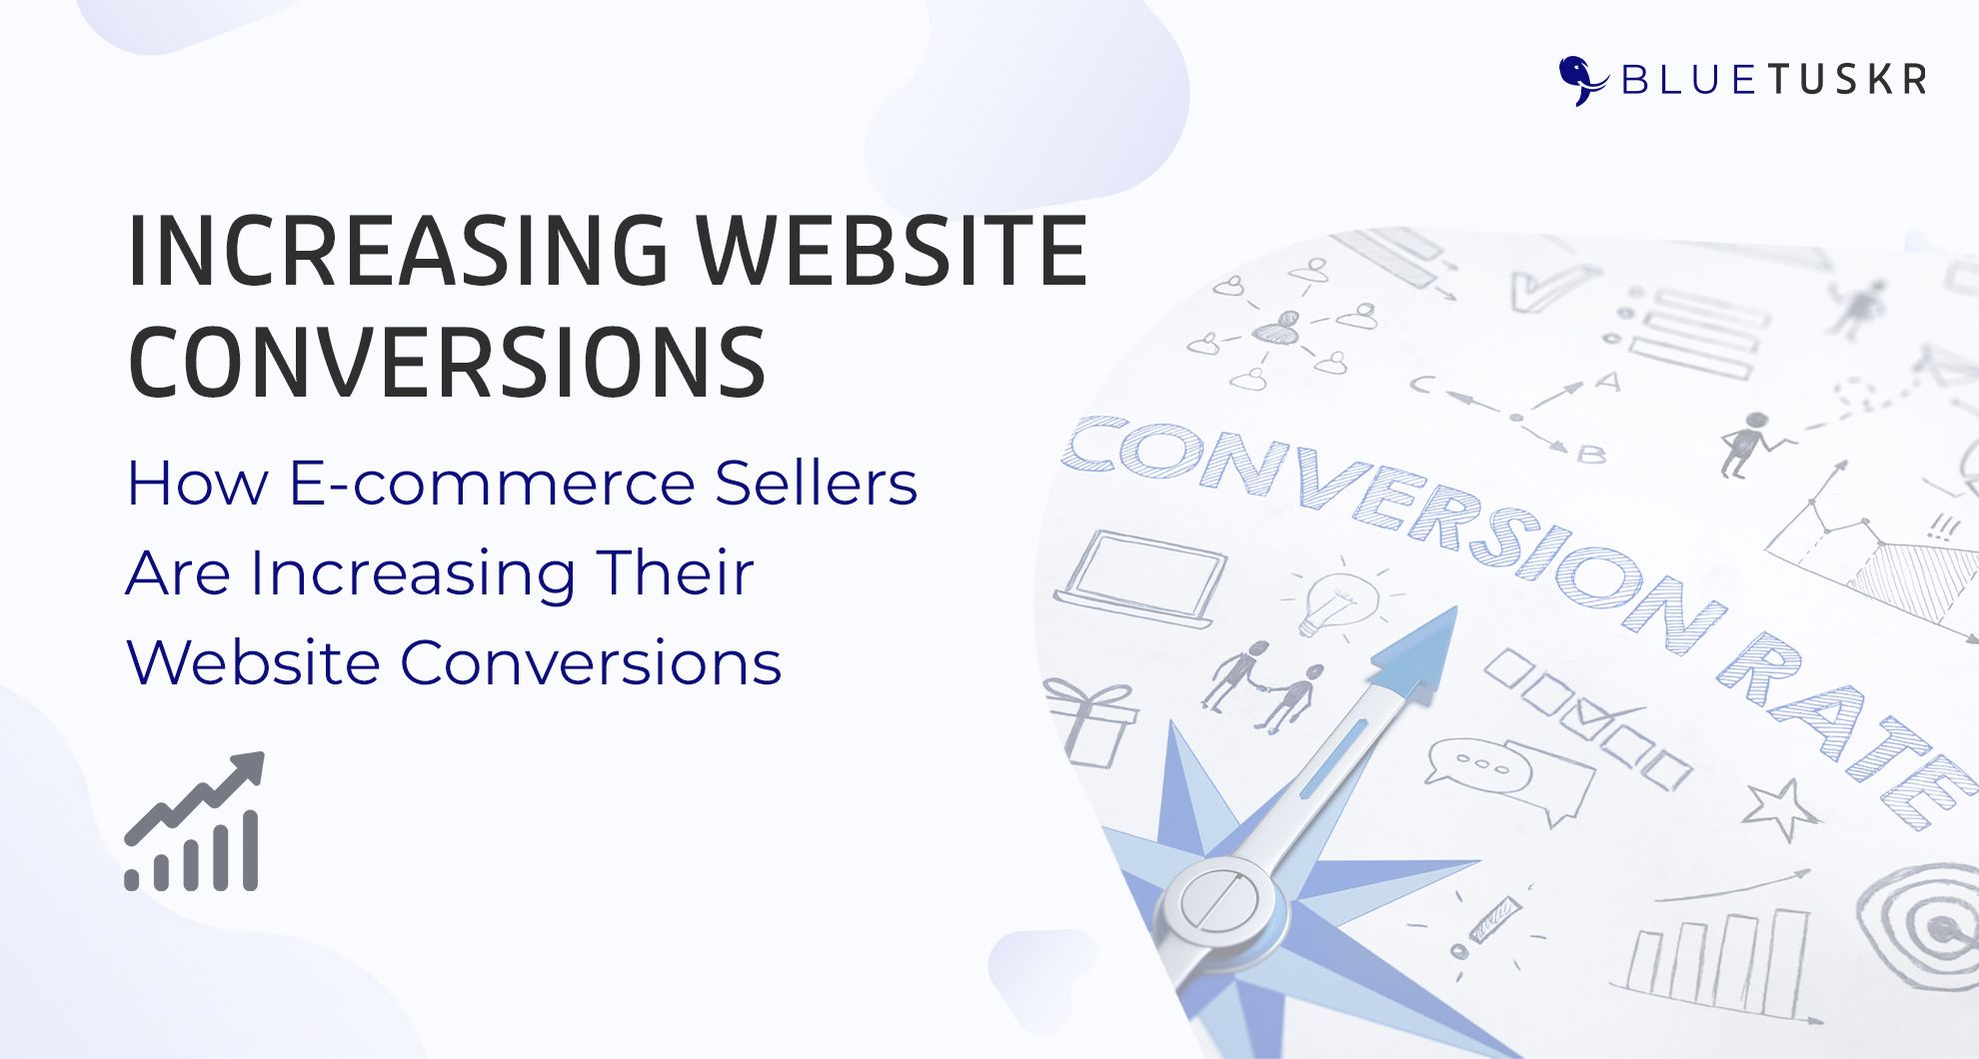 How E-commerce Sellers Are Increasing Their Website Conversions